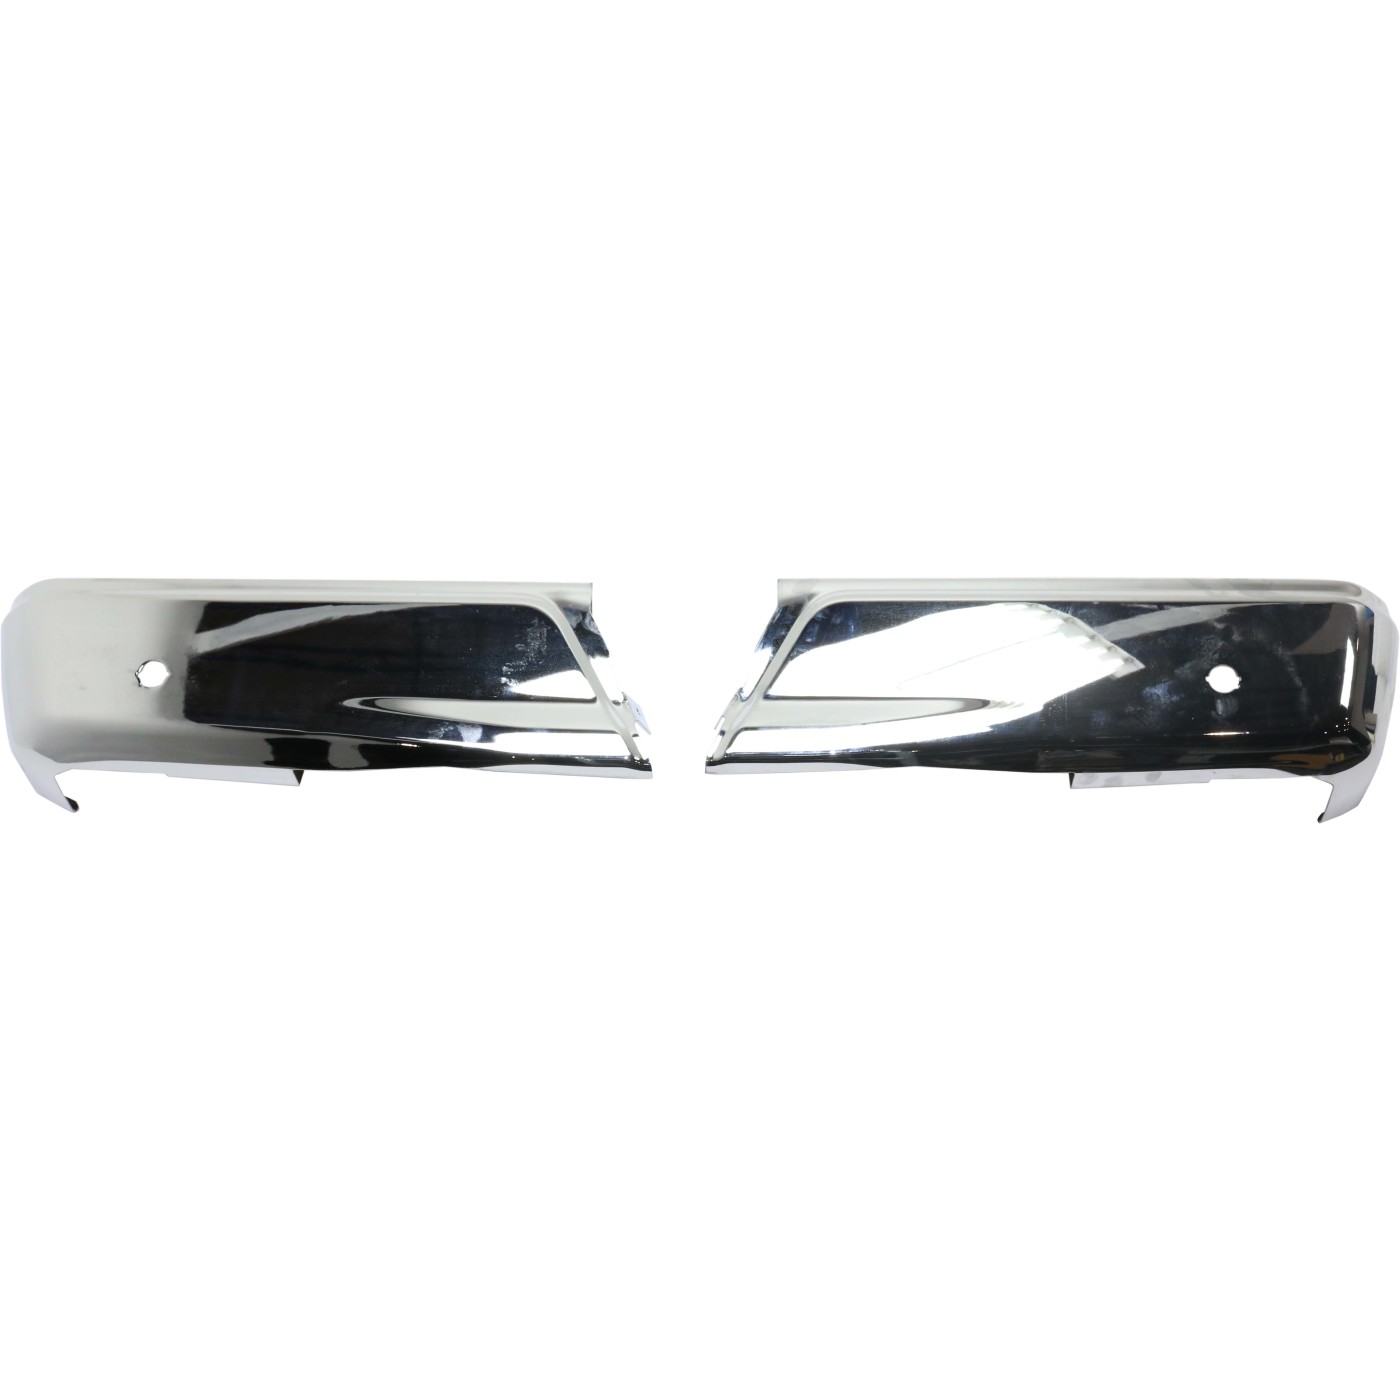 New Set Of 2 Step Bumper Face Bars Rear Chrome For F150 Truck Fo1102381 Pair Ebay